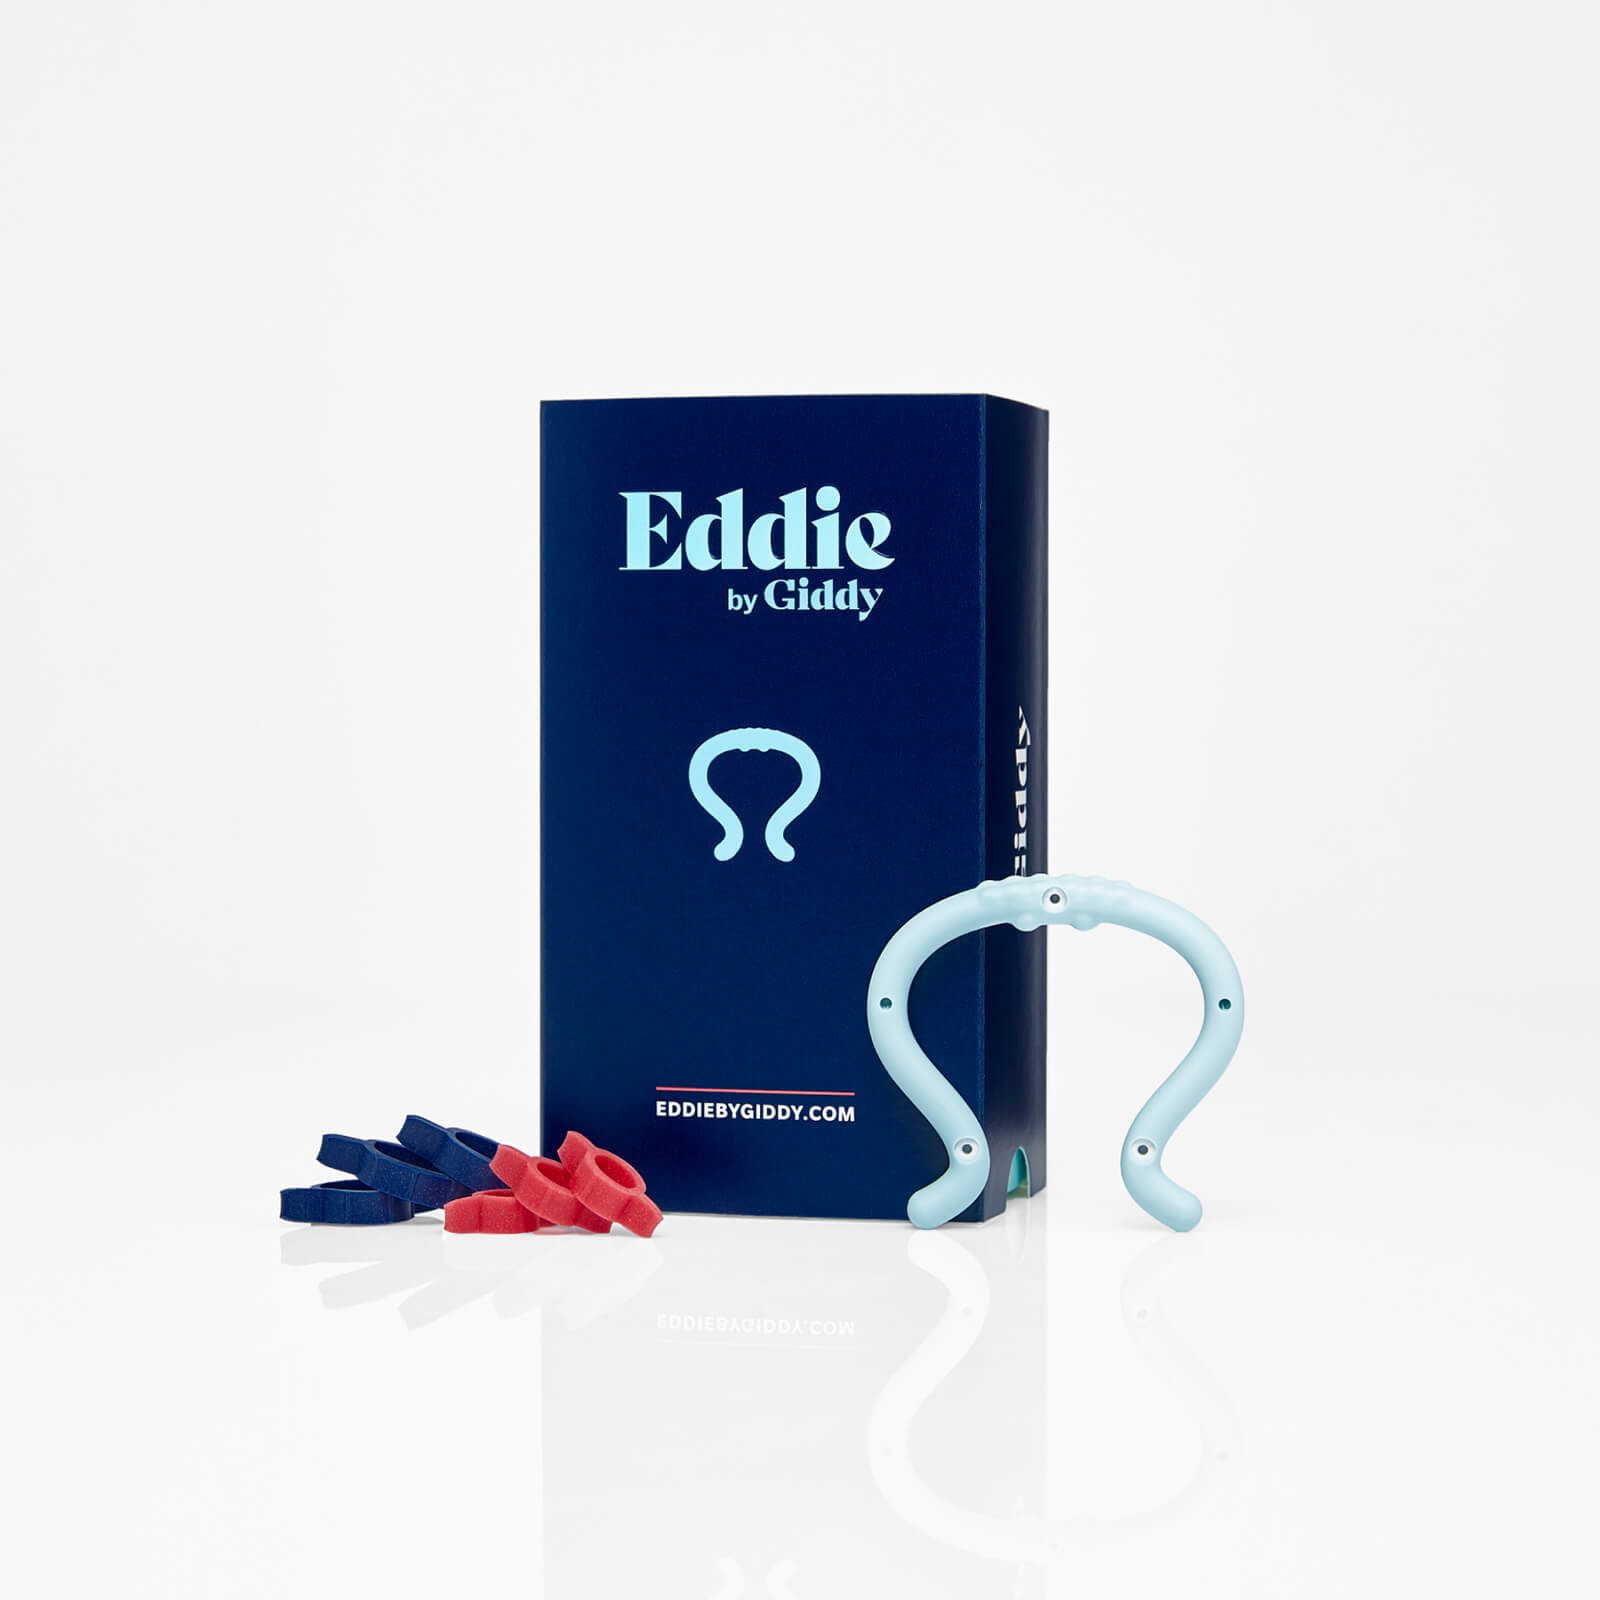 Eddie Product Box Image with Eddie and Bands